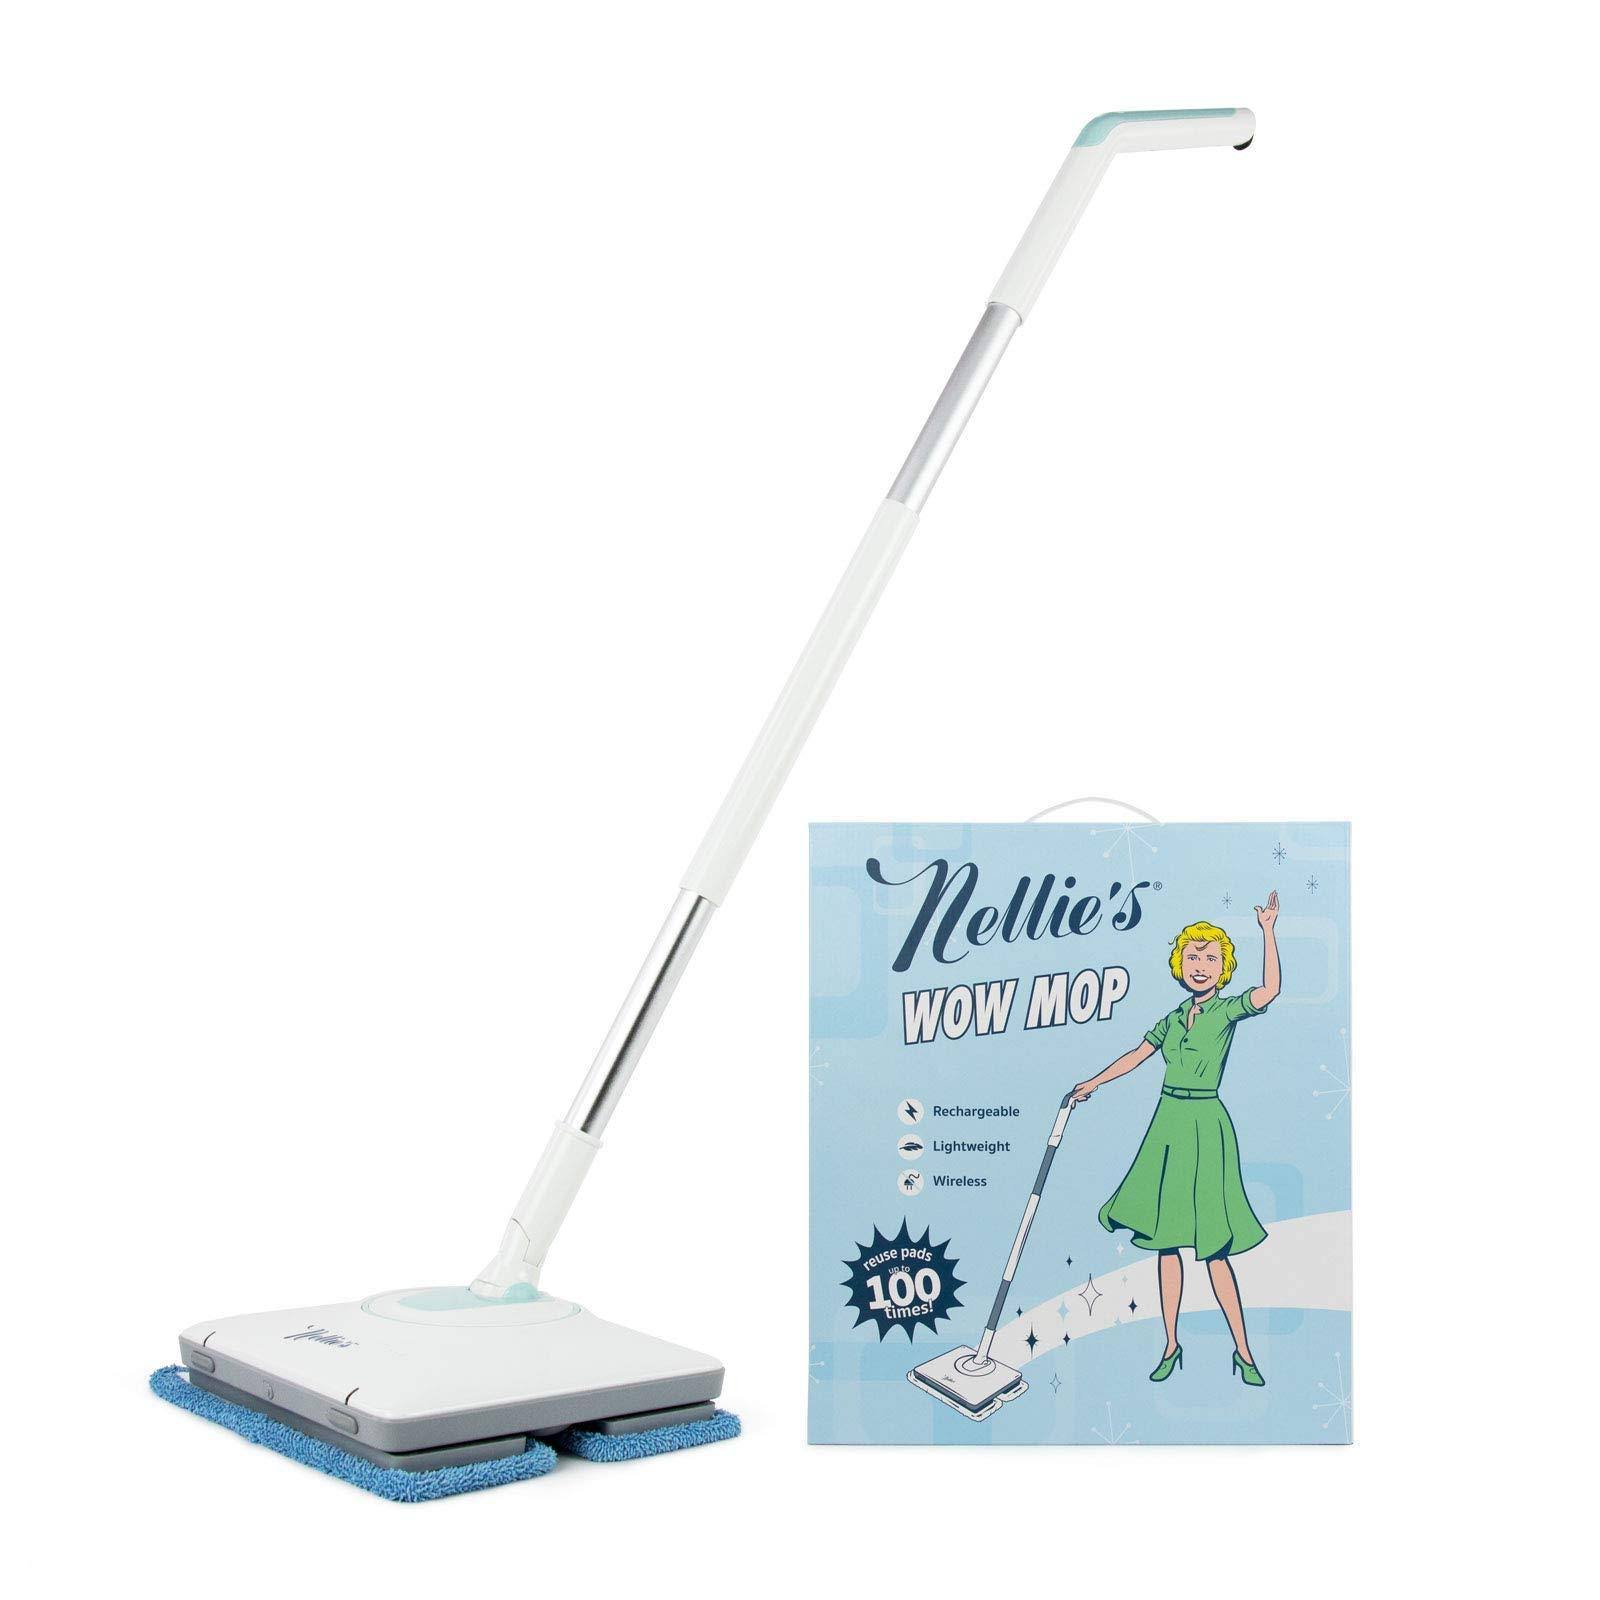 Nellie's All Natural Cordless Light Weight and Rechargeable Wow Mop